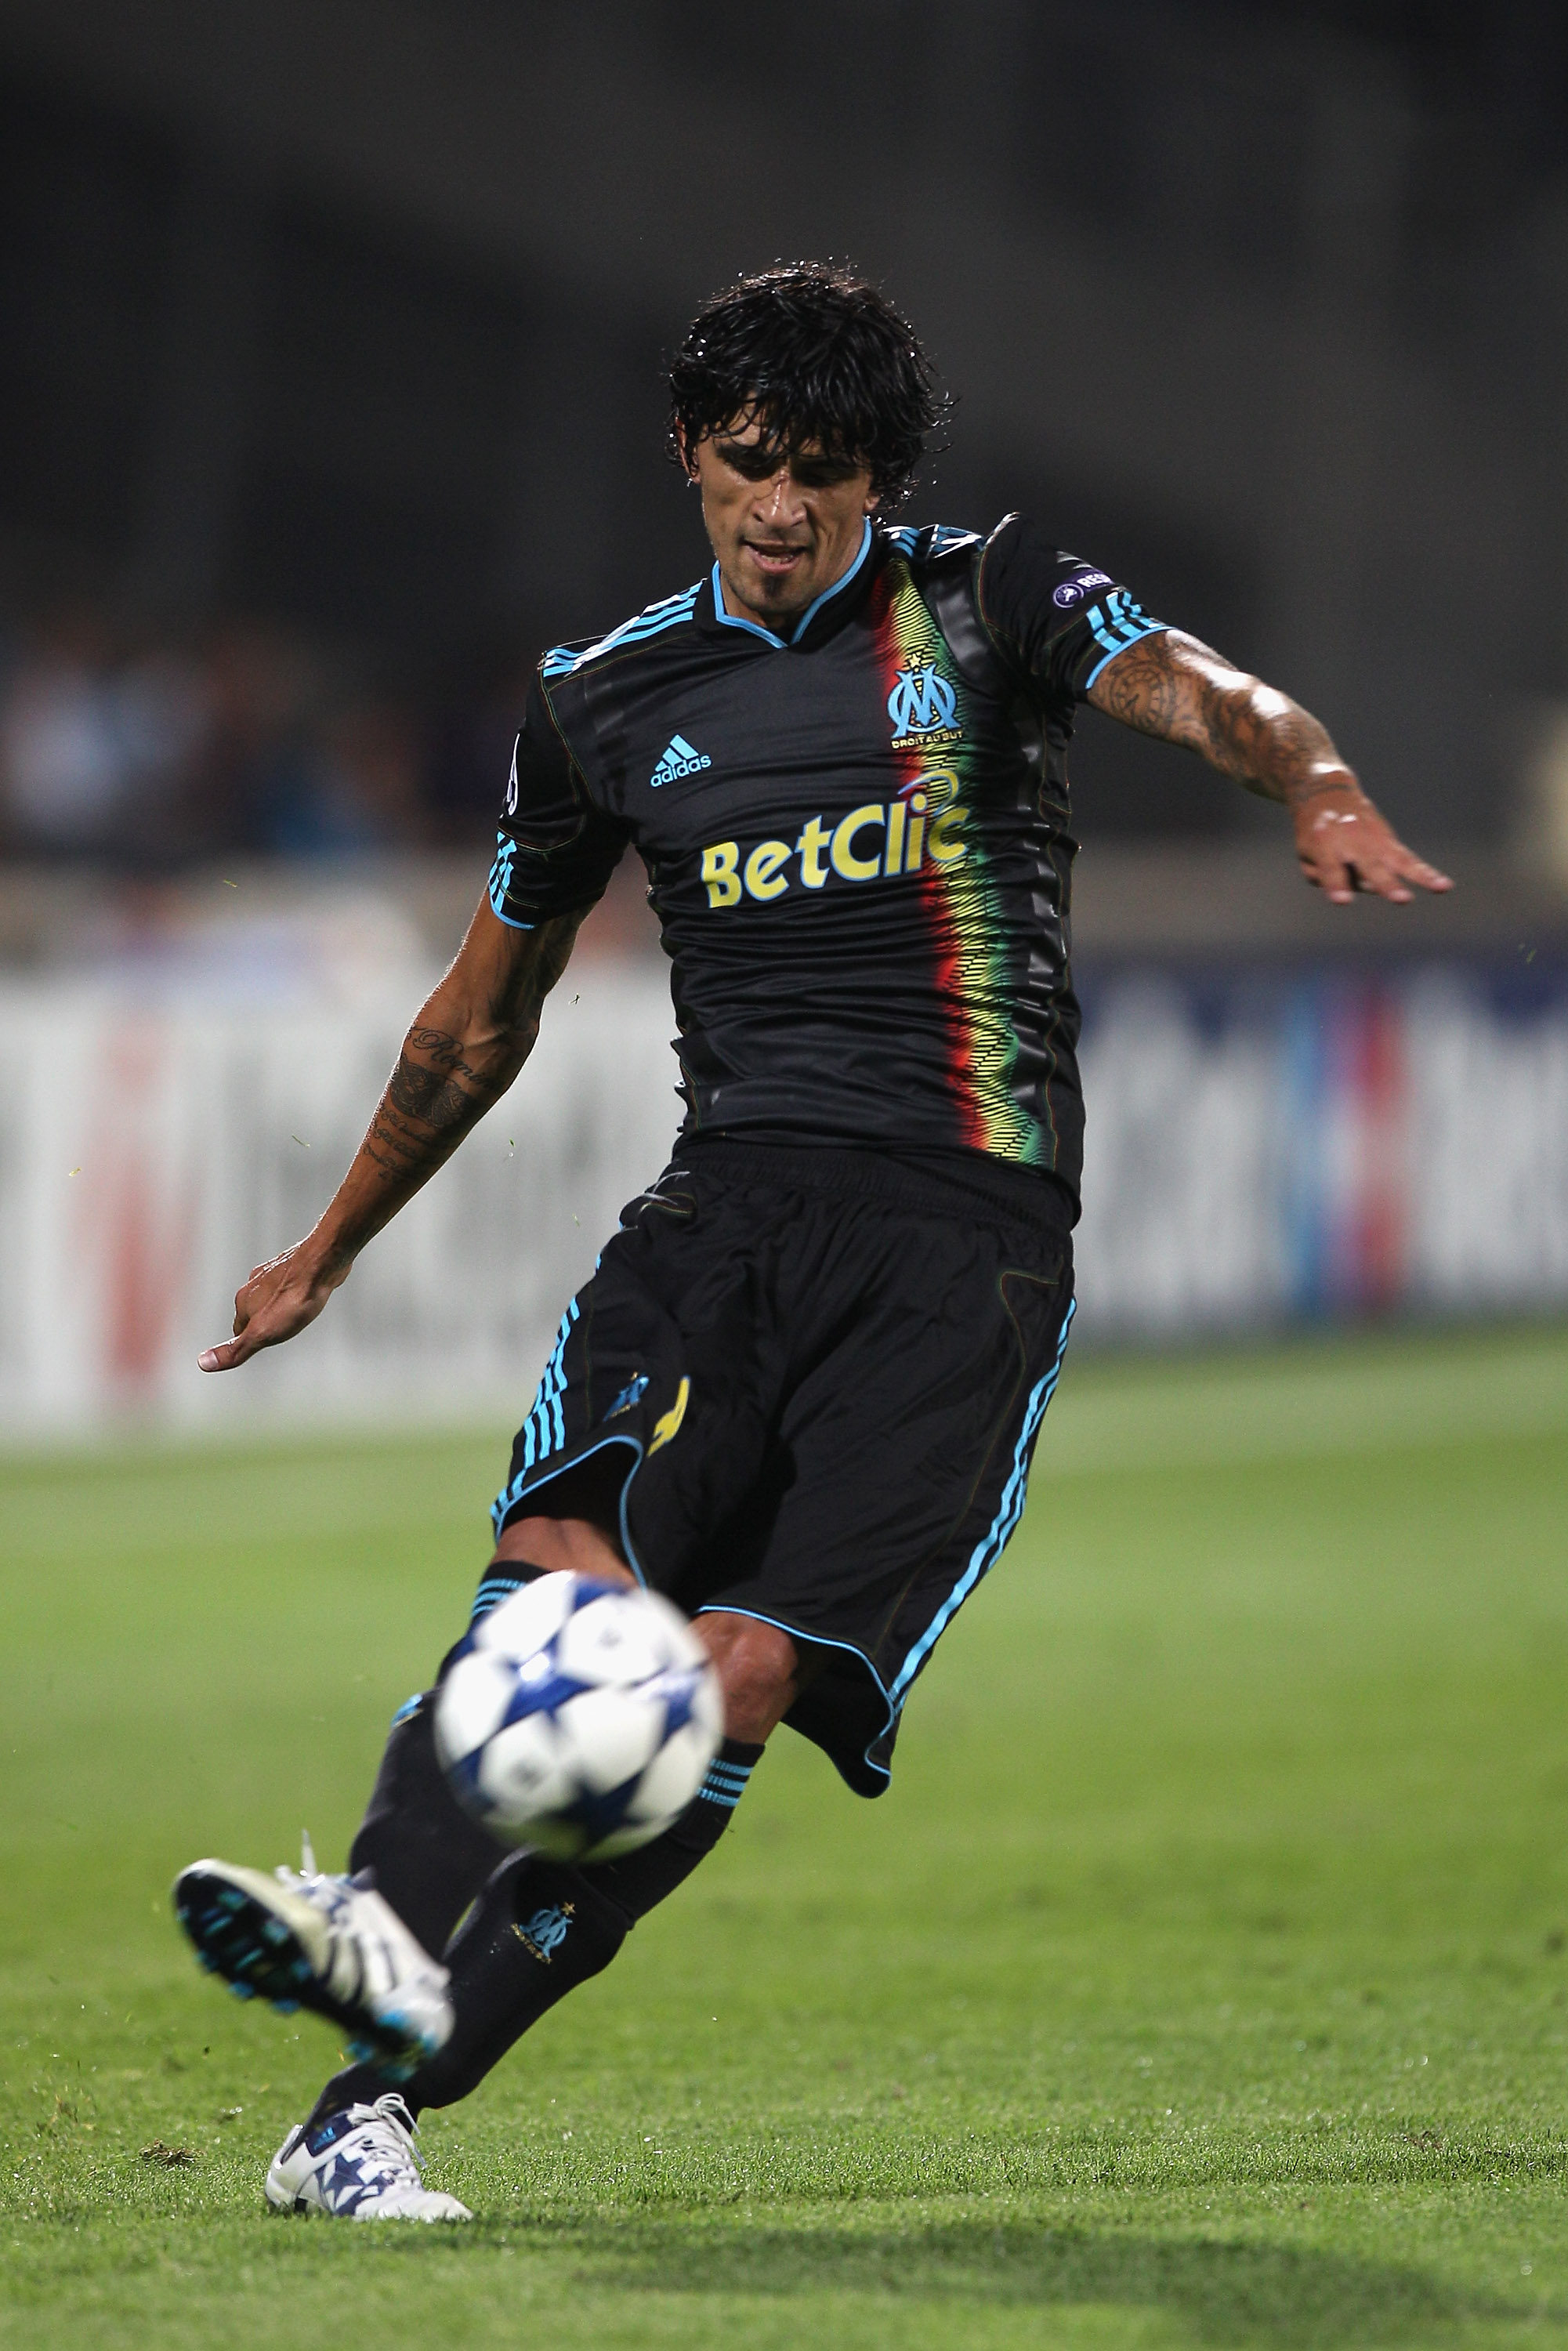 MARSEILLE, FRANCE - SEPTEMBER 15:  Lucho Gonzalez of Marseille during the UEFA Champions League Group F match between Olympique Marseille and Spartak Moscow at the Stade Velodrome on September 15, 2010 in Marseille, France.  (Photo by Michael Steele/Getty